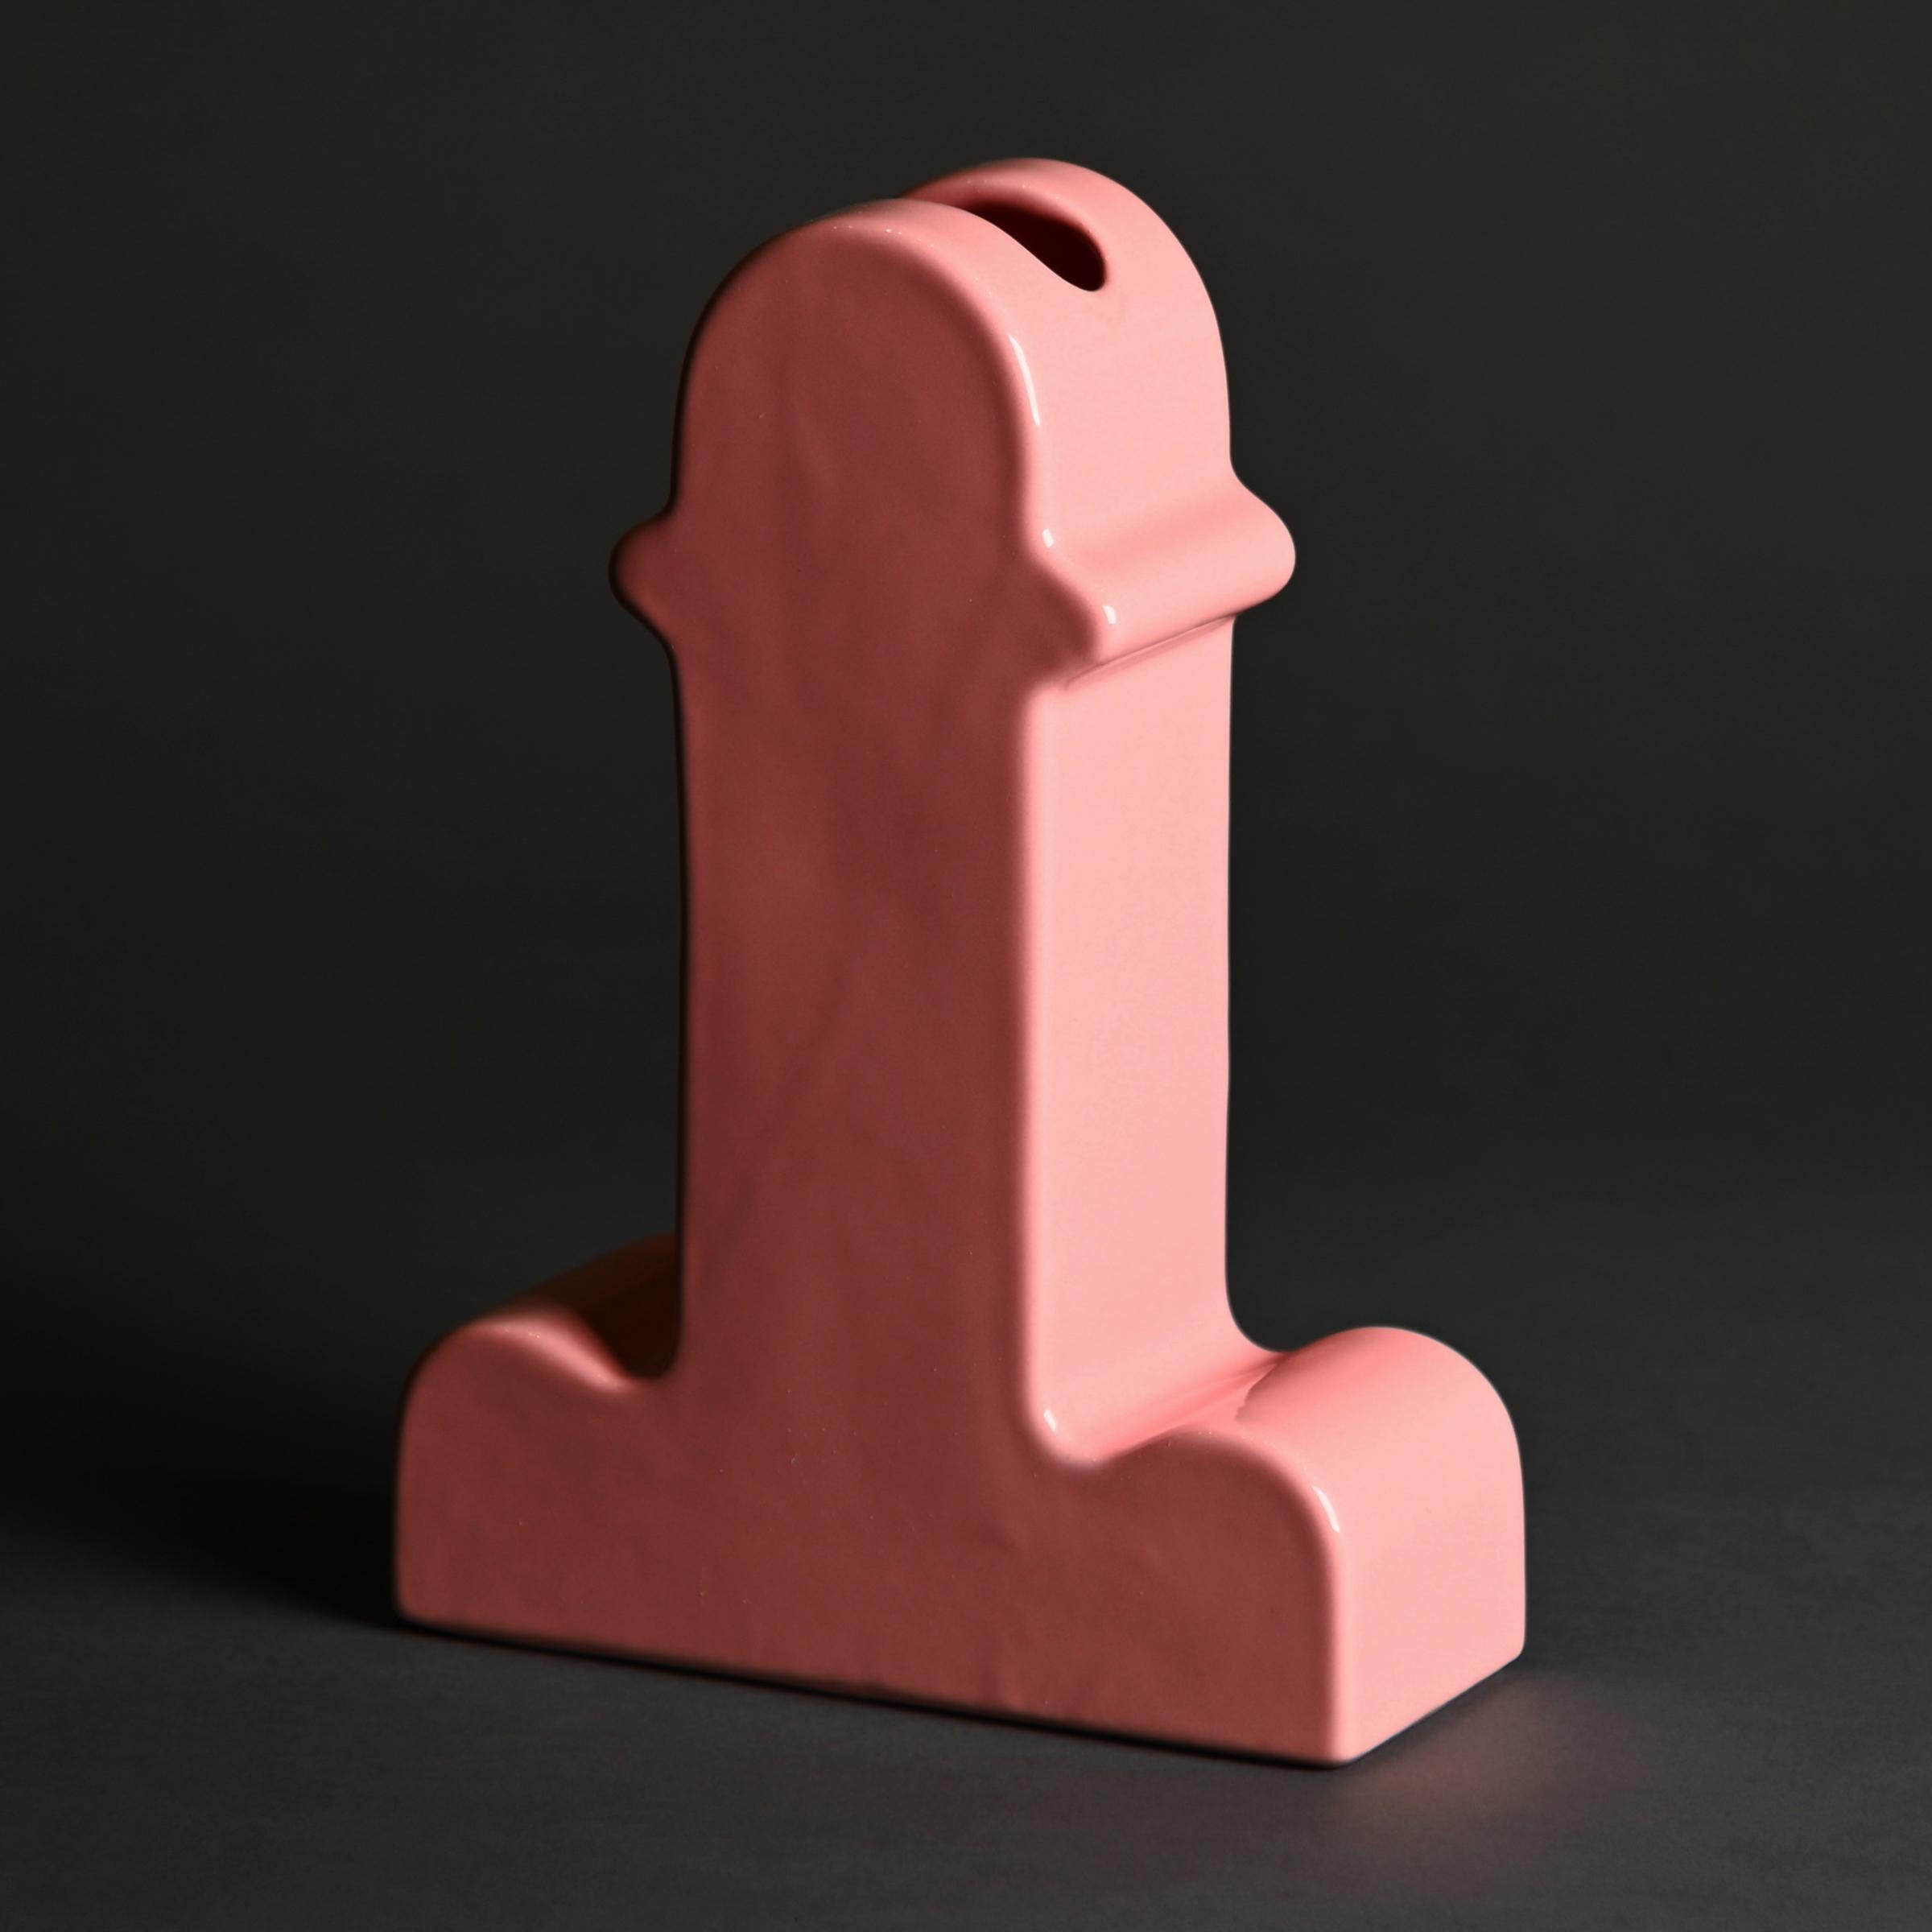 Ettore Sottsass ceramic pink 'Shiva Vase' designed in 1971 and produced by BD Barcelona, Spain. The vase will ship in the original box and is in excellent condition.

Sottsass: “I continue to produce small, small, small architectures, such as this